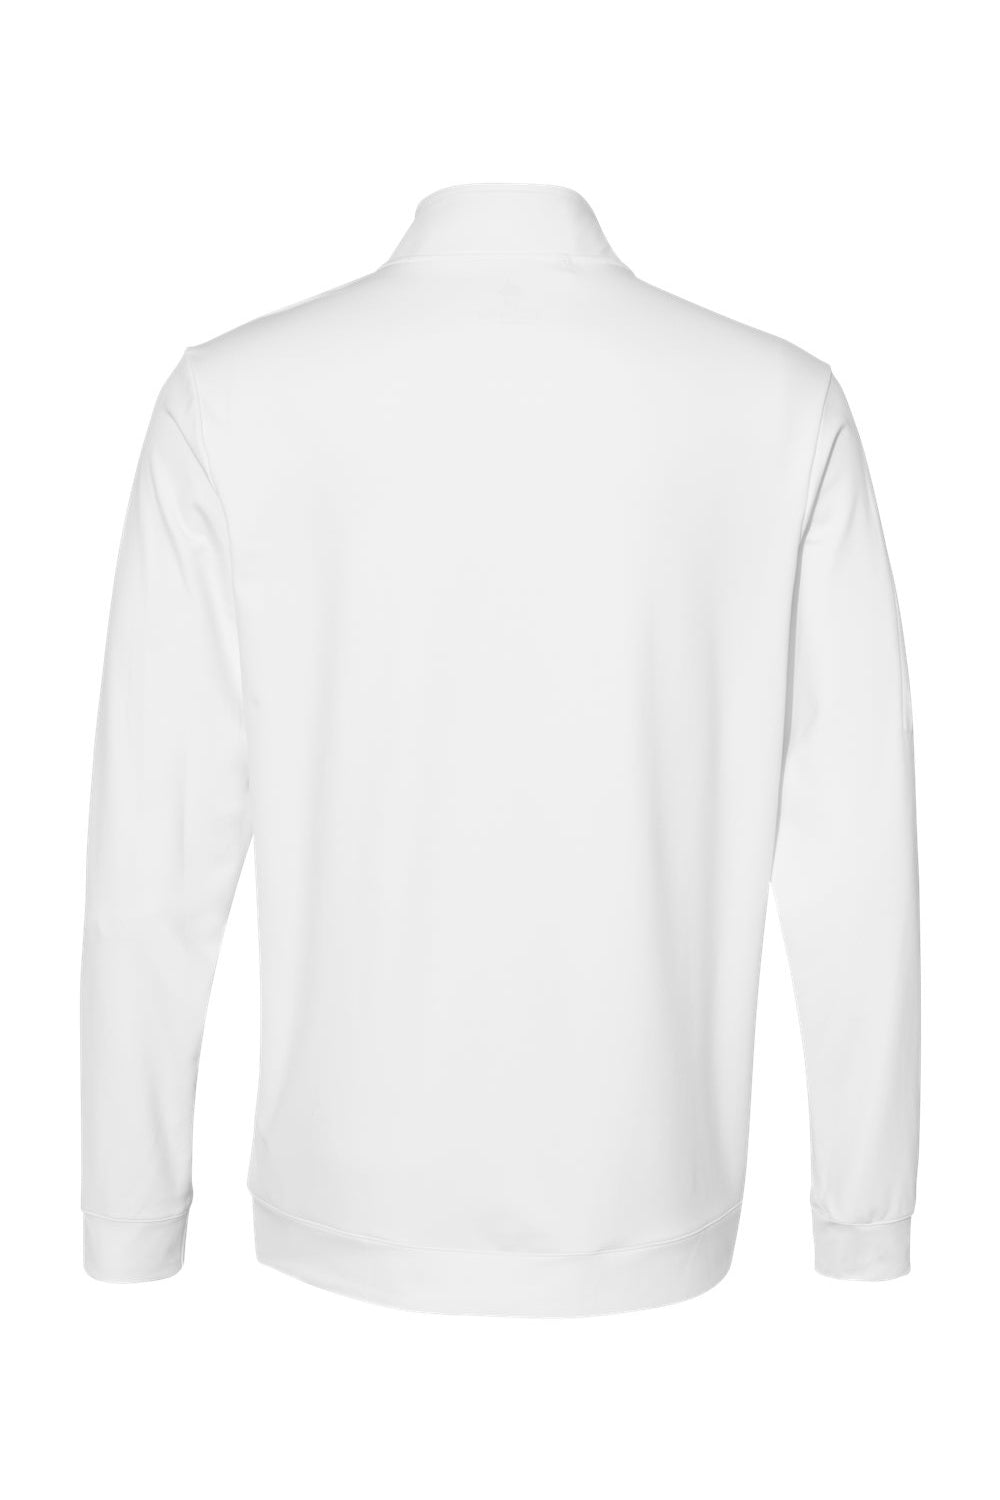 Adidas A295 Mens Performance 1/4 Zip Pullover White Flat Back